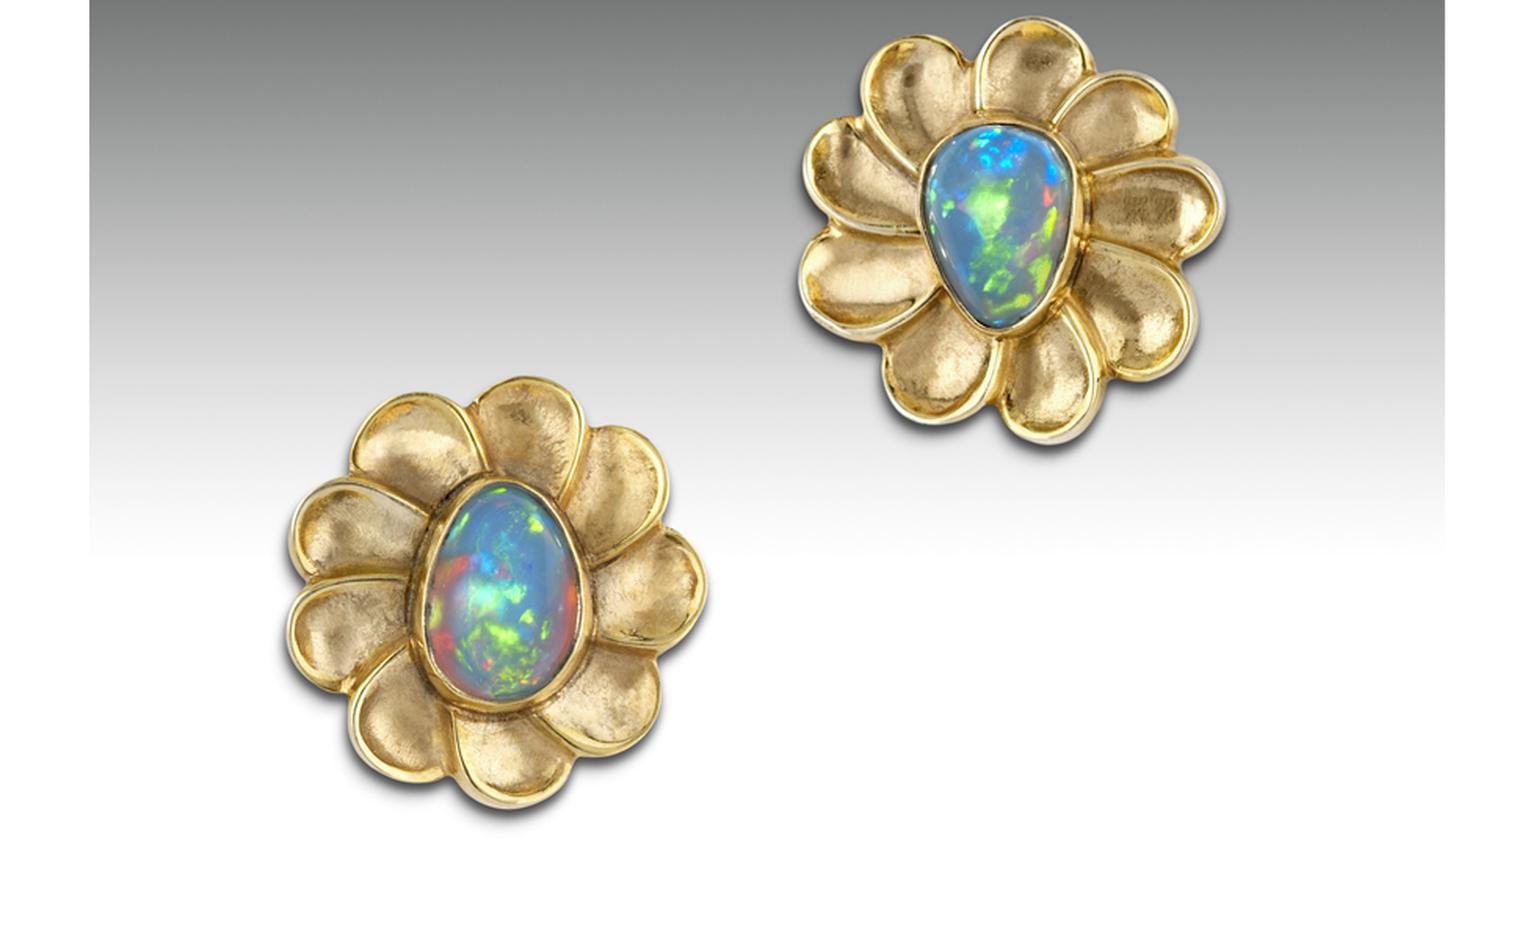 Ornella Iannuzzi: Addis Ababa earrings.  With 2cts hand-carved Wello opals set in 22k vermeil. Unique piece. SOLD - on commission from £750.Ornella Iannuzzi: Addis Ababa earrings.  With 2cts hand-carved Wello opals set in gold-plated silver. Unique pie...